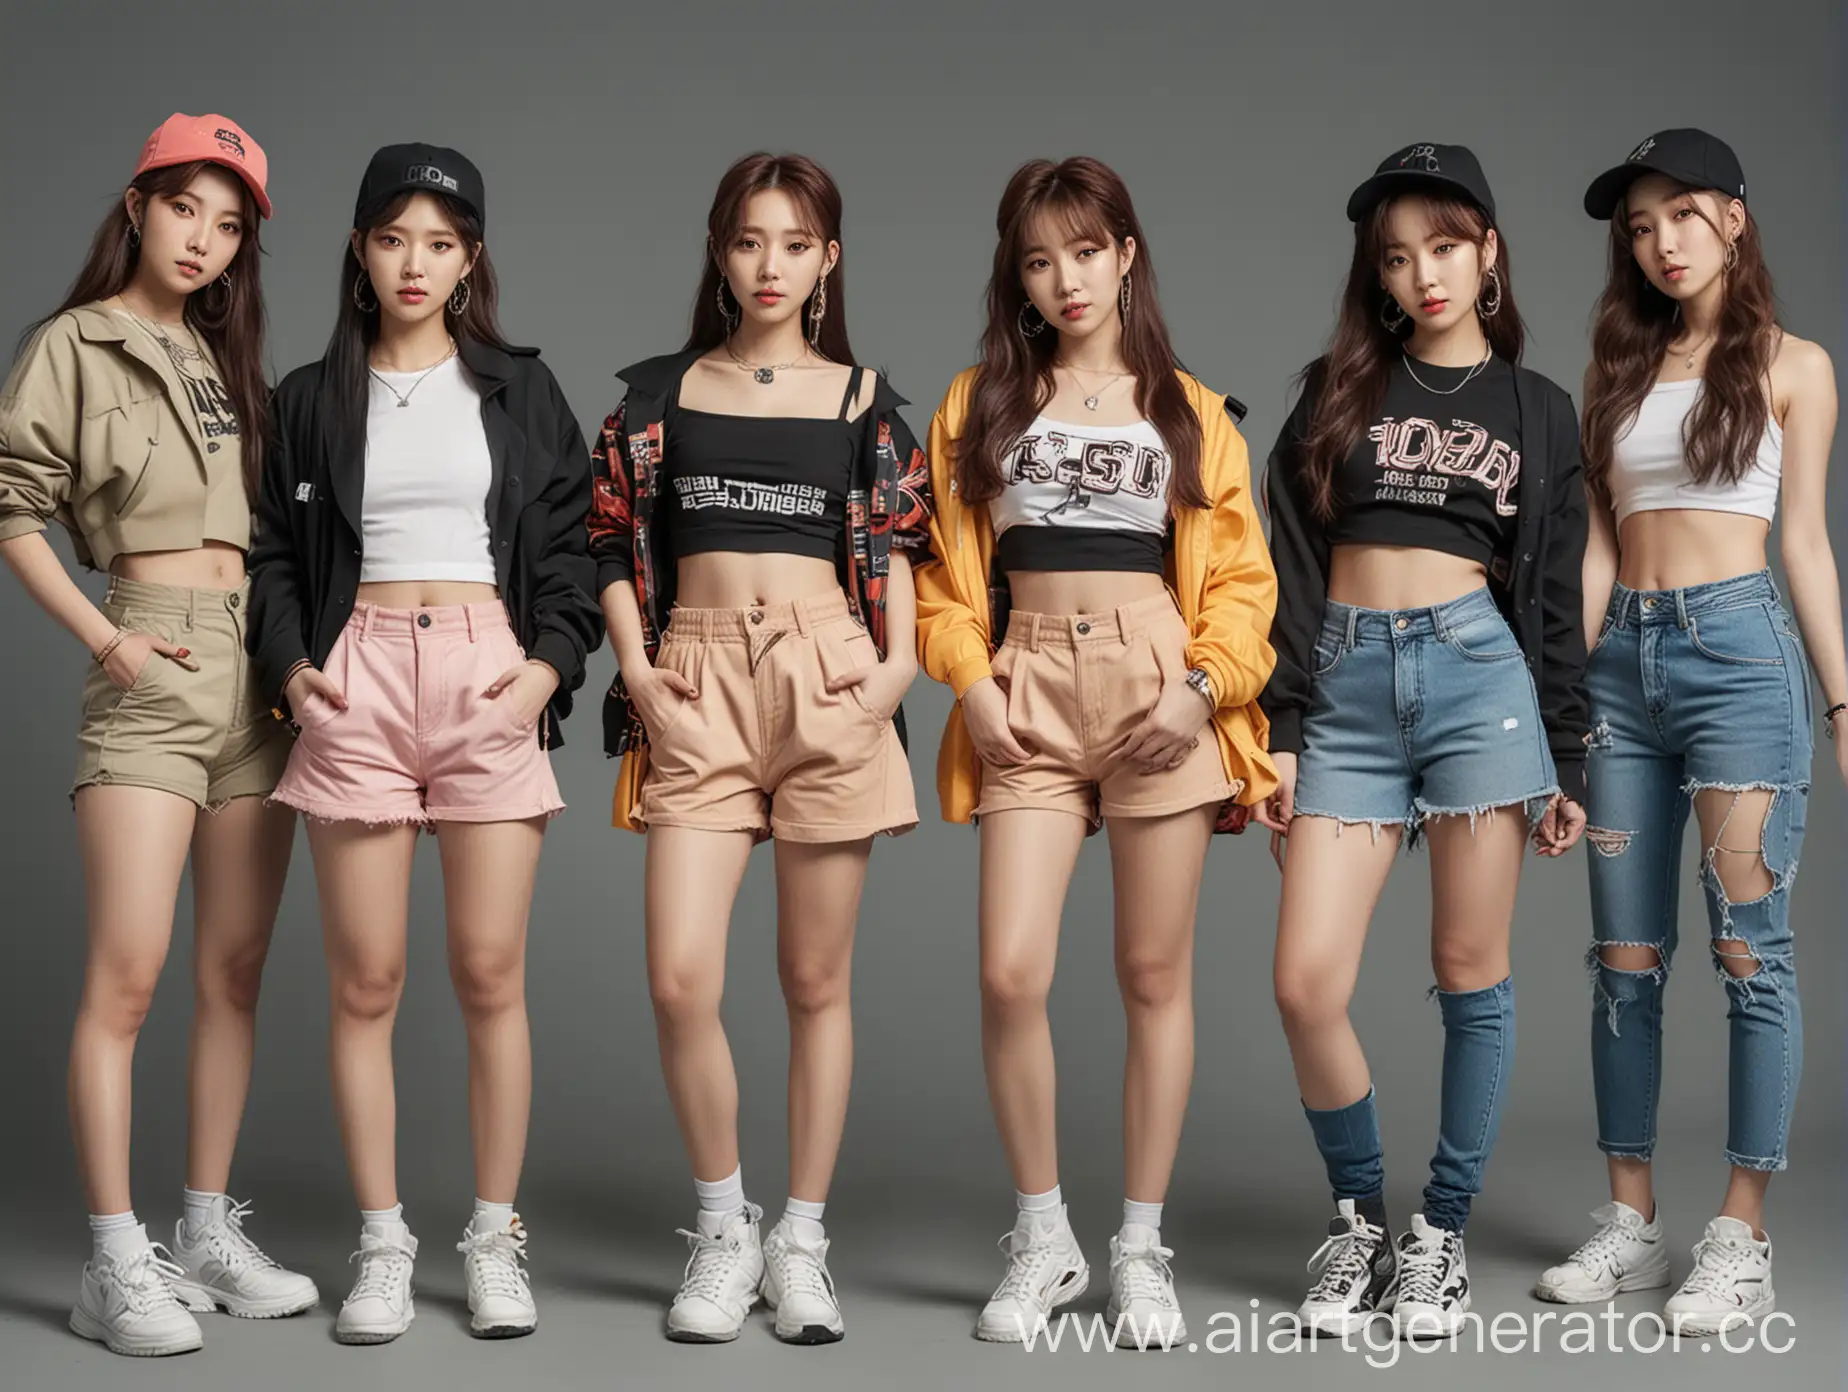 KPop-Inspired-HipHop-Fashion-Group-of-Five-Korean-Women-in-Full-Height-Portrait